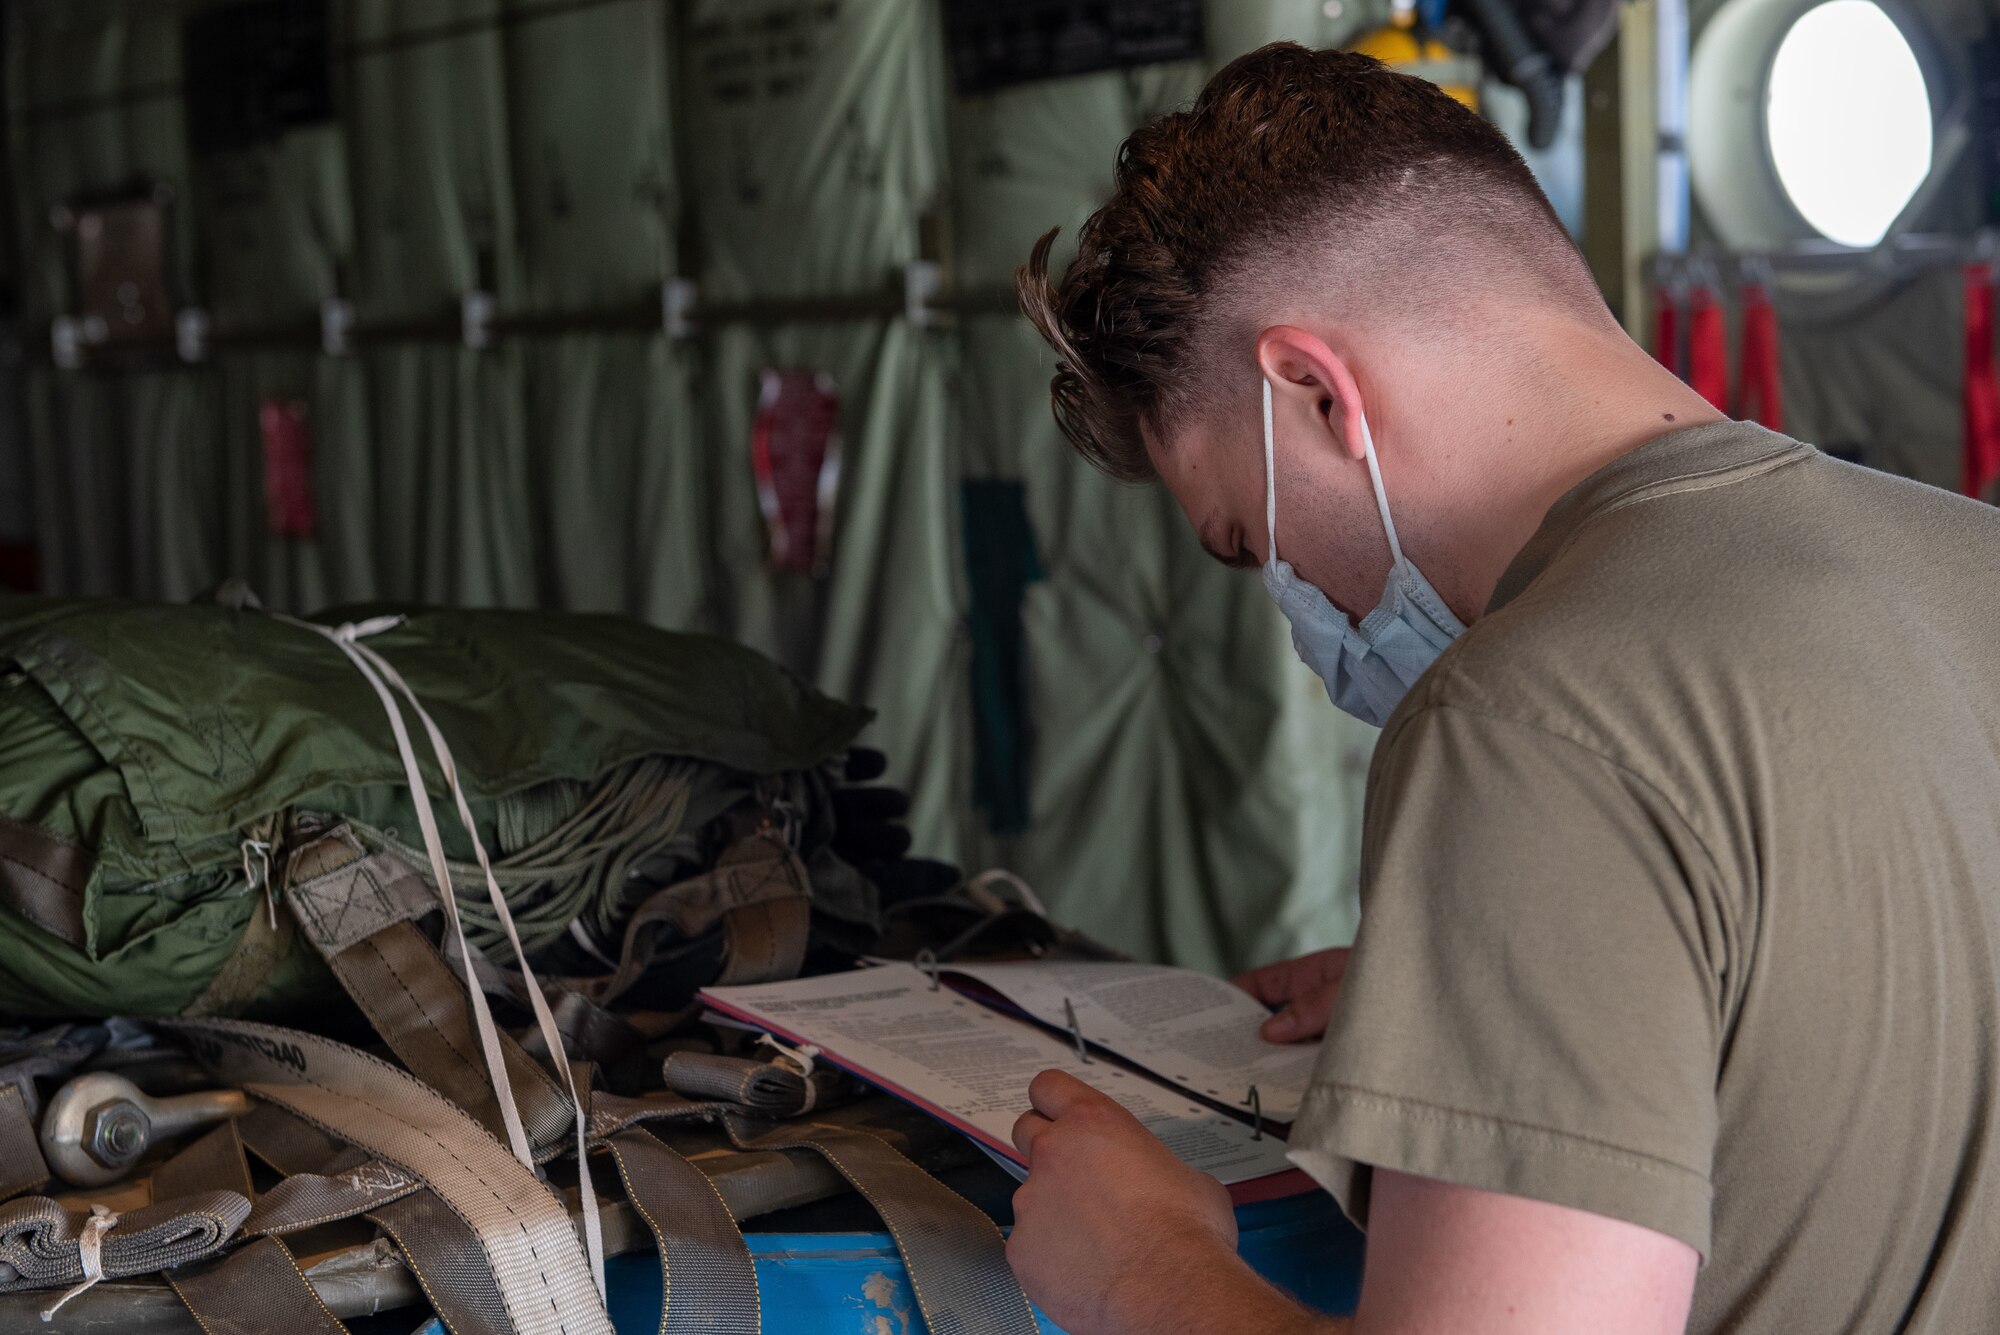 An Airman references instructions for securing a pallet in an aircraft.